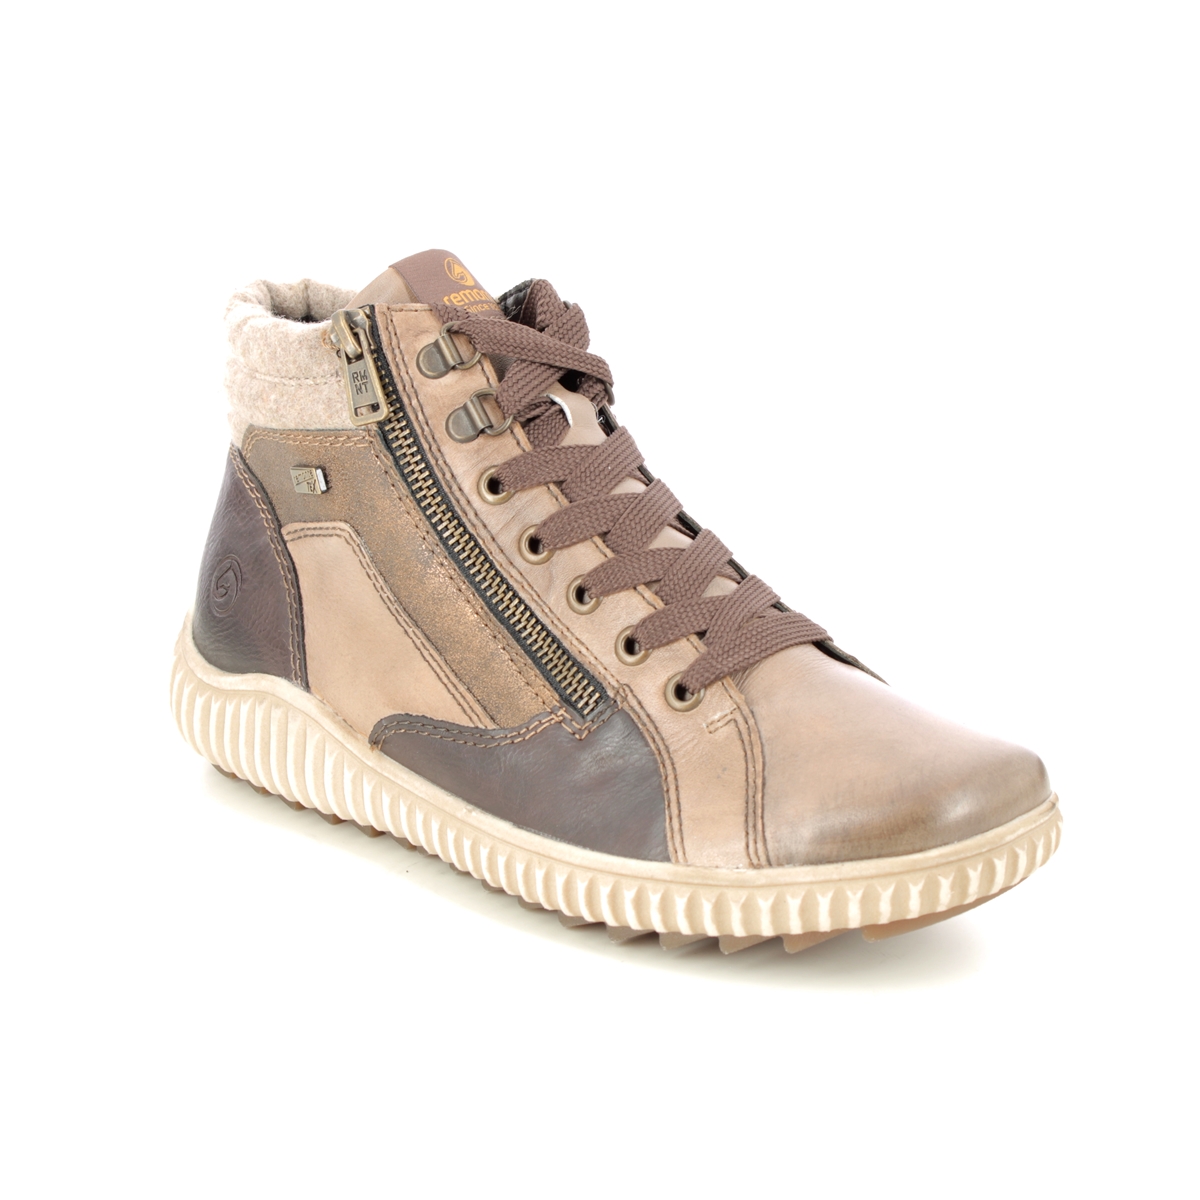 Remonte Wiser Zip Tex Light Taupe Leather Womens Hi Tops R8271-20 In Size 39 In Plain Light Taupe Leather